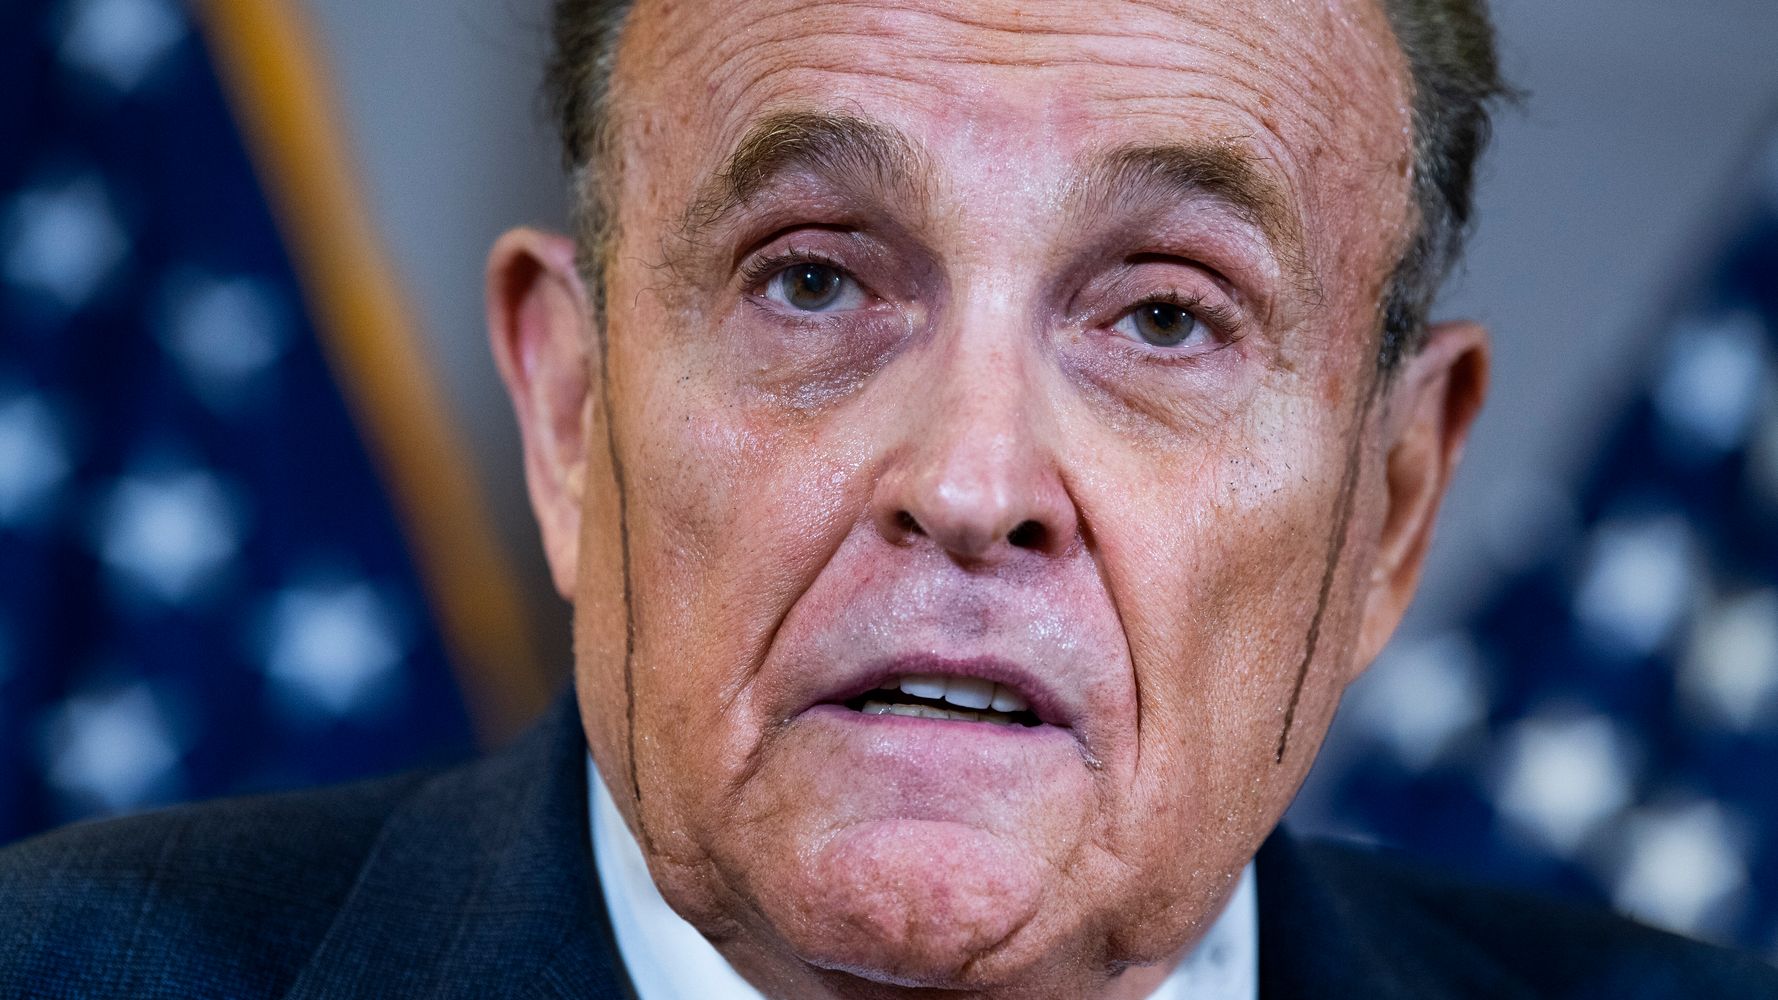 Jan. 6 Committee Reportedly Grills Rudy Giuliani For 9 Hours